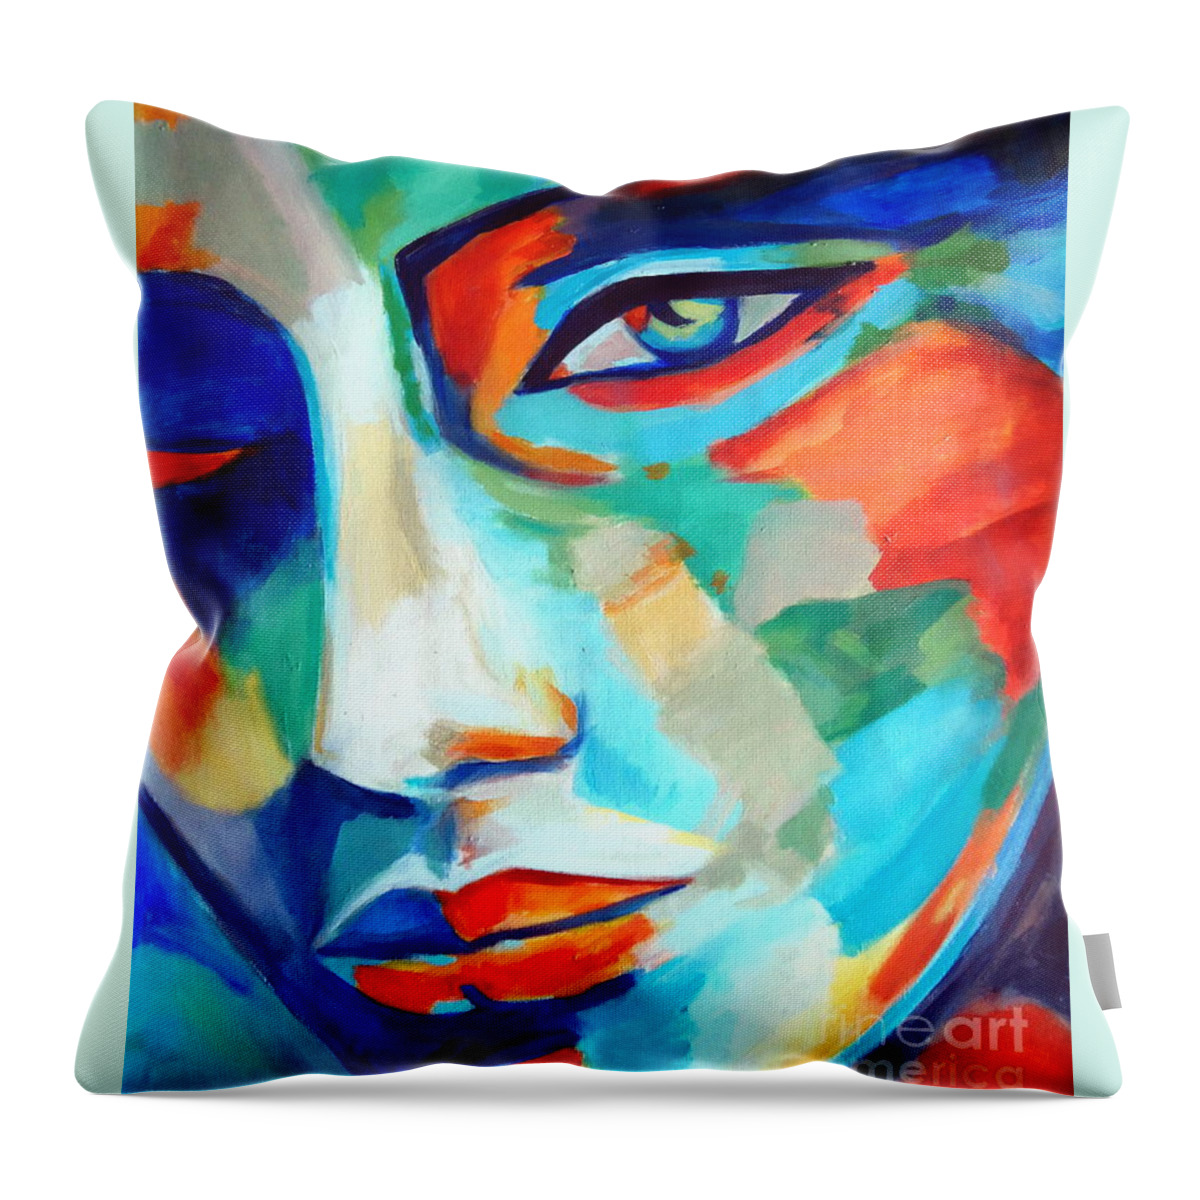 Affordable Original Paintings Throw Pillow featuring the painting Divine Consciousness by Helena Wierzbicki